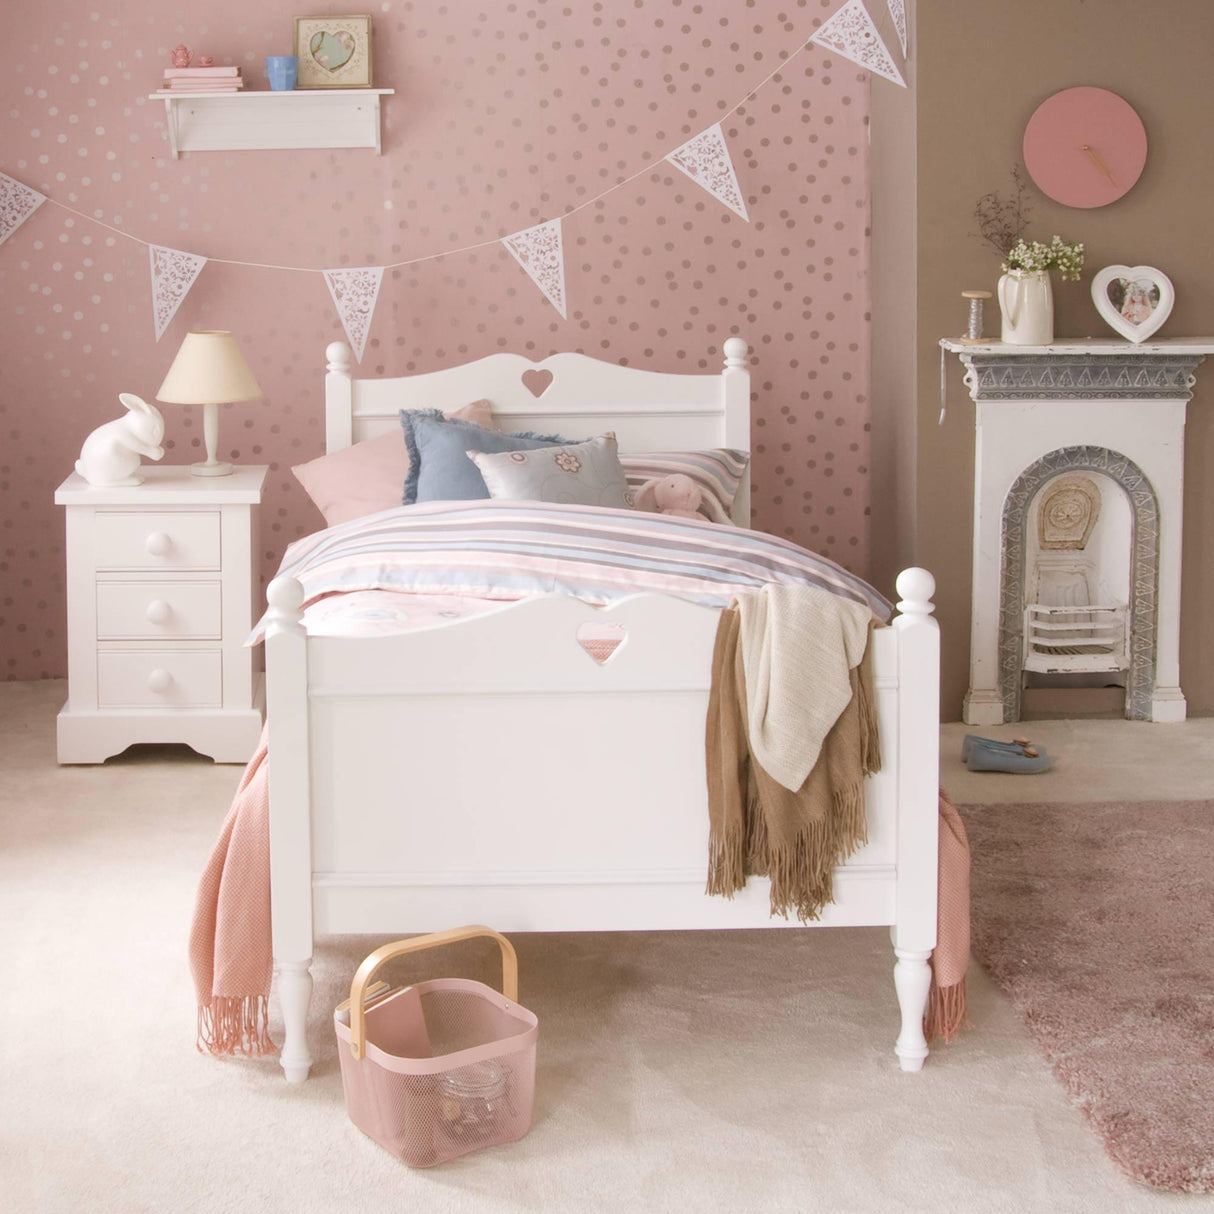 Little Folks Fargo Single Bed with Hearts In Pure White - Little Snoozes